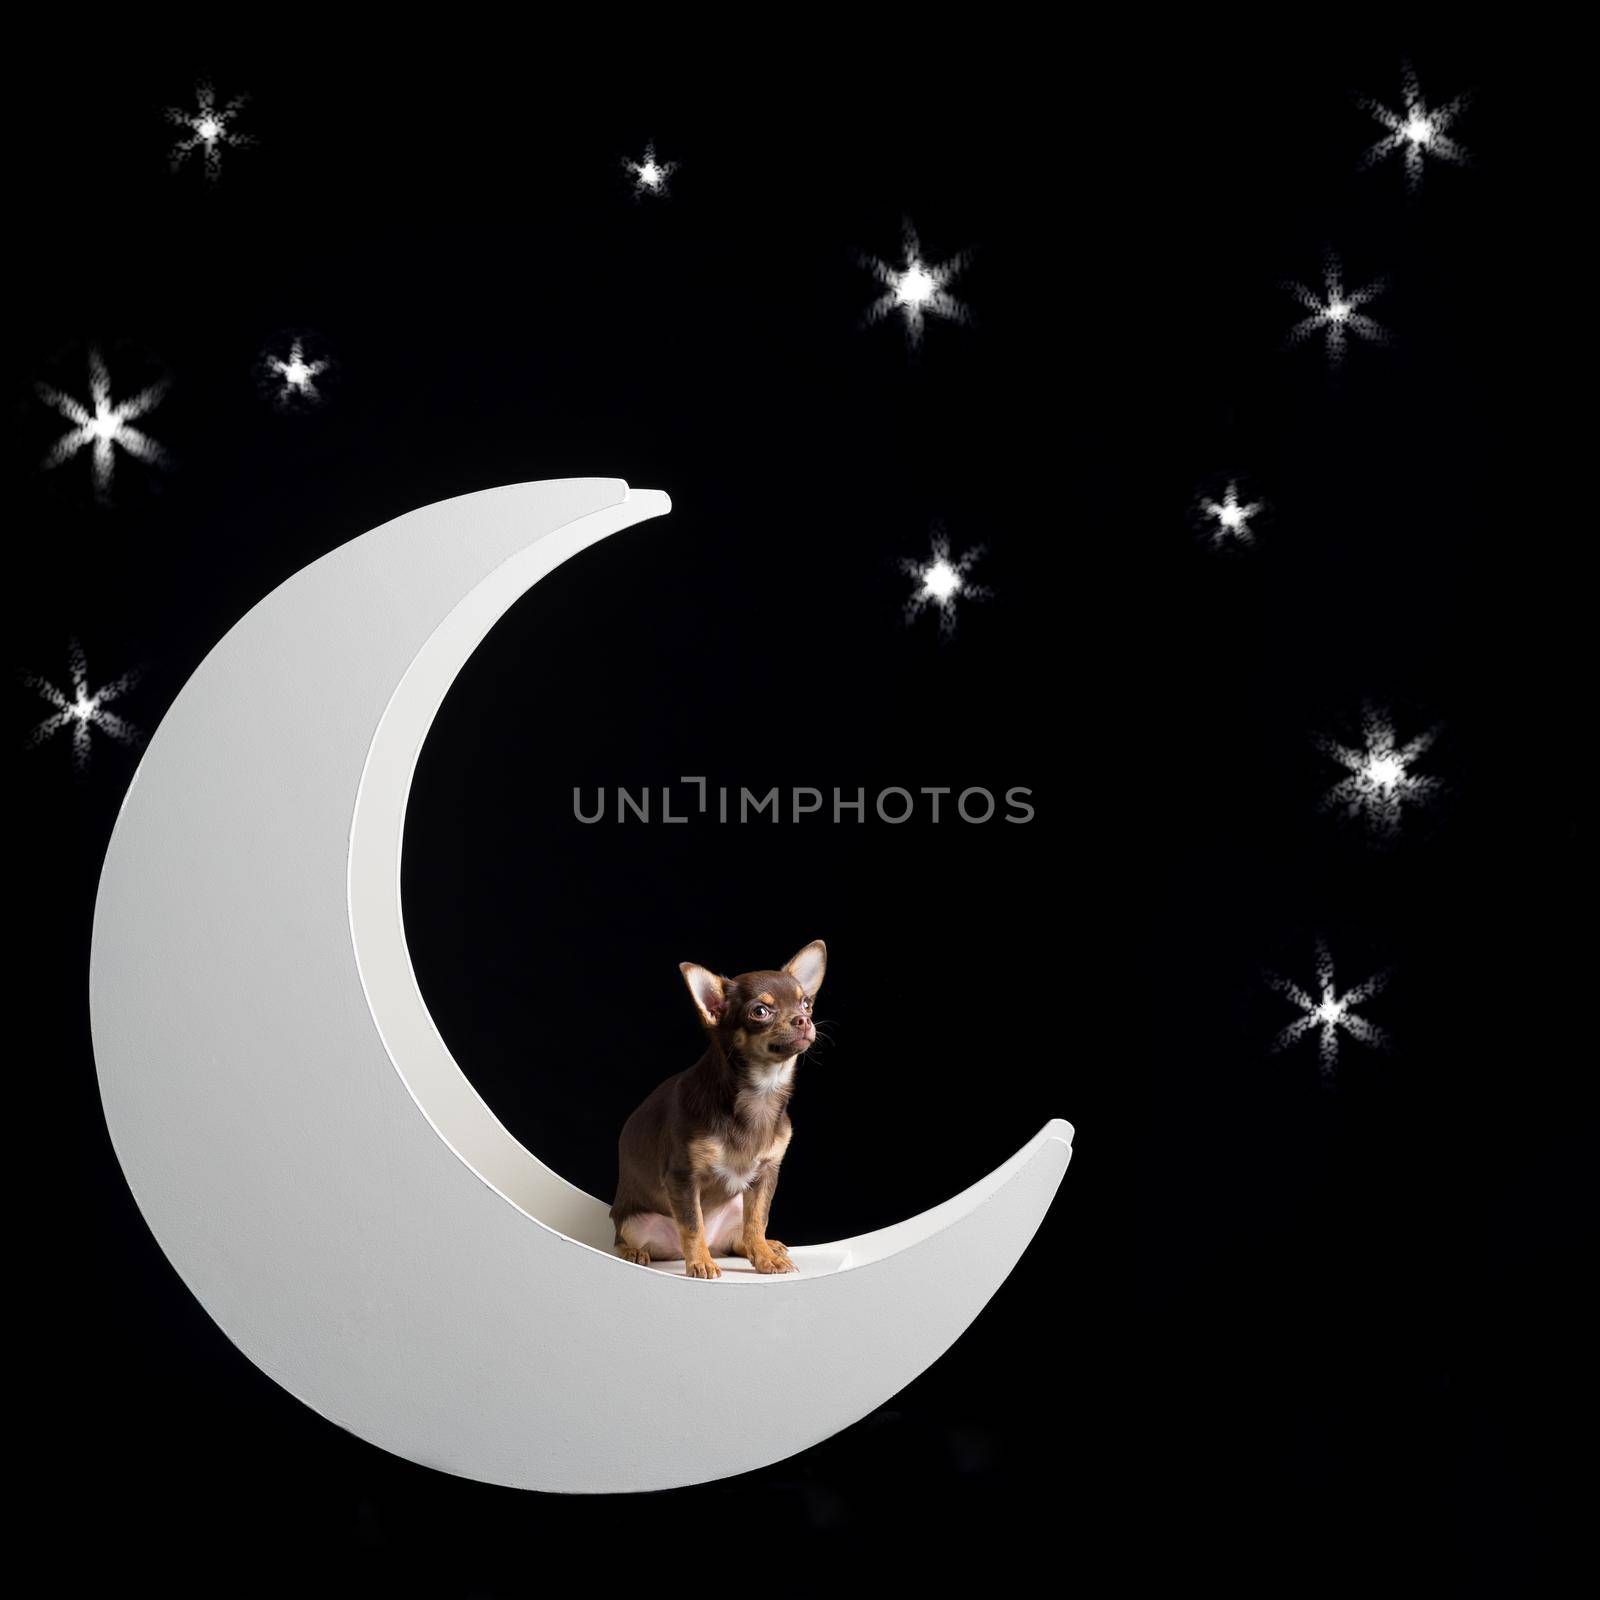 Little multicolored chihuahua at moon in starry background by LeoniekvanderVliet